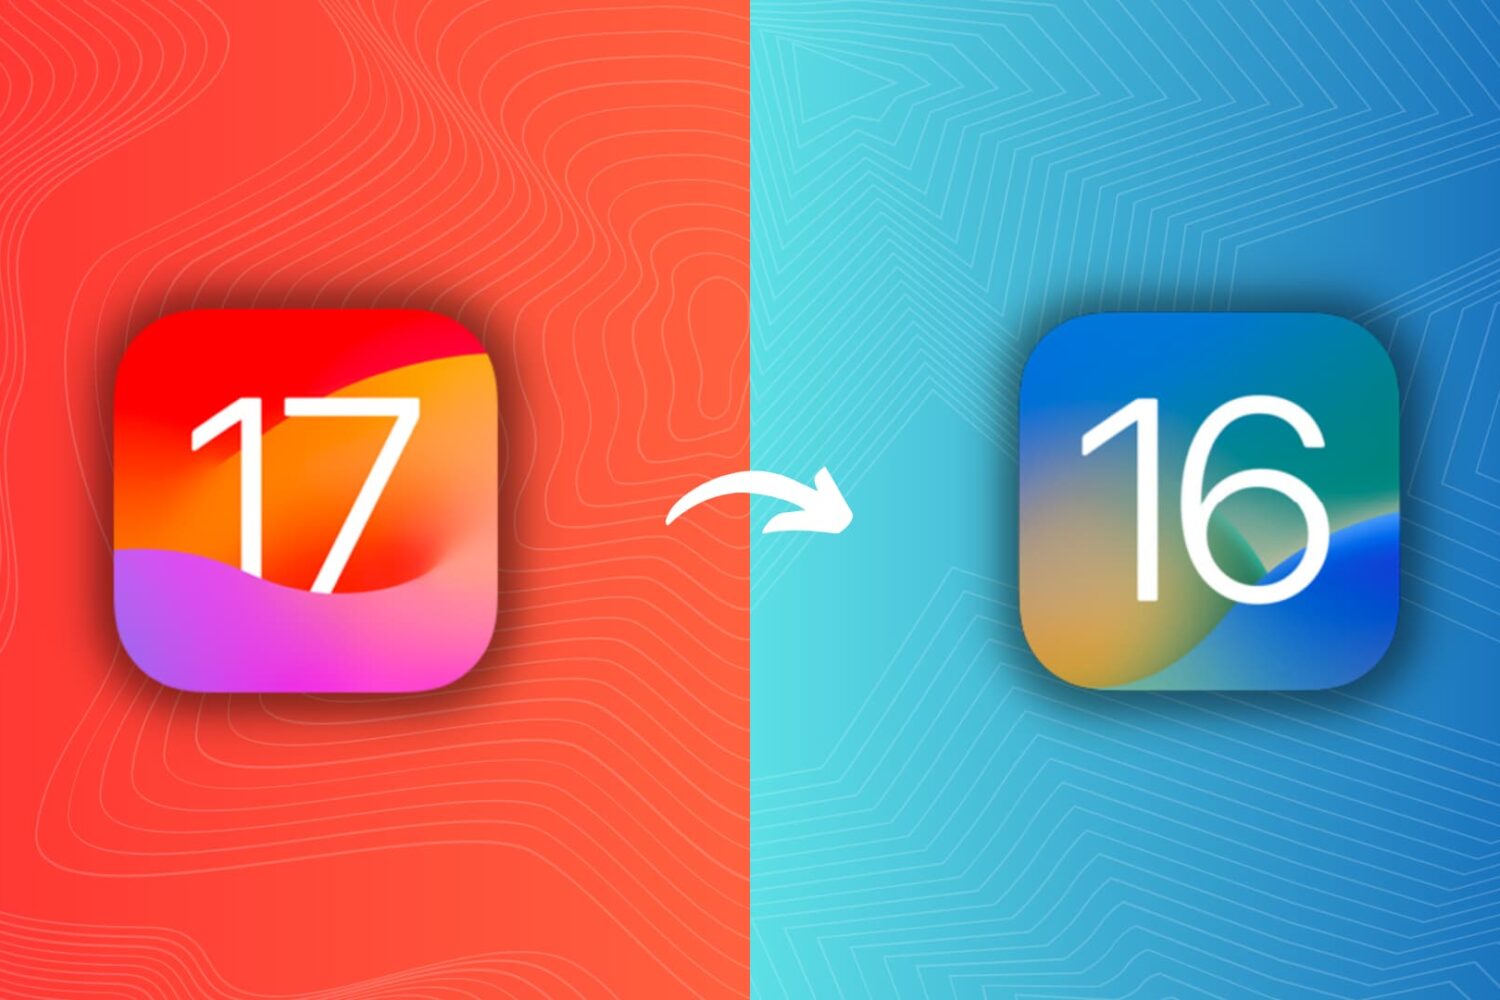 Switch from iOS 17 to iOS 16